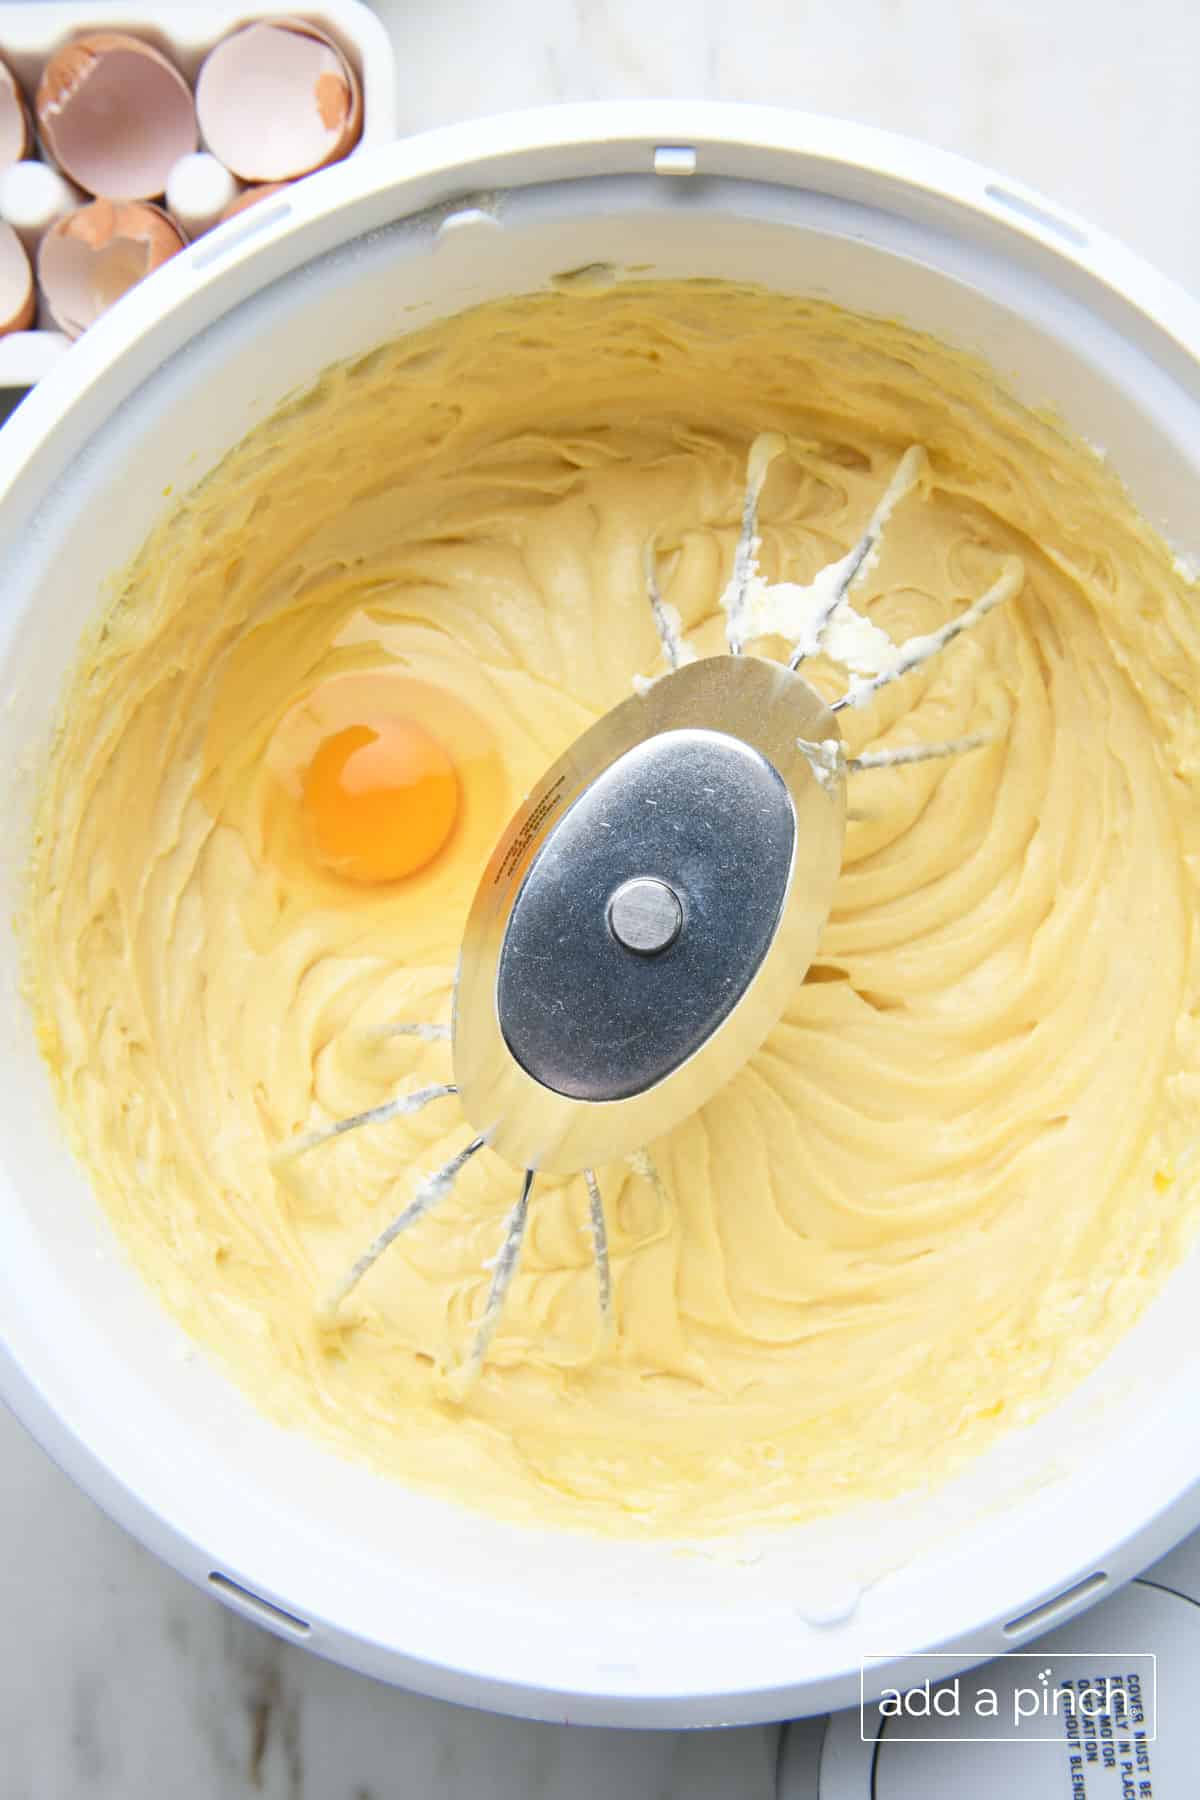 Final egg is blended into other mixed ingredients in a stand mixer bowl. Egg shells sit on marble countertop behind the bowl in egg container.